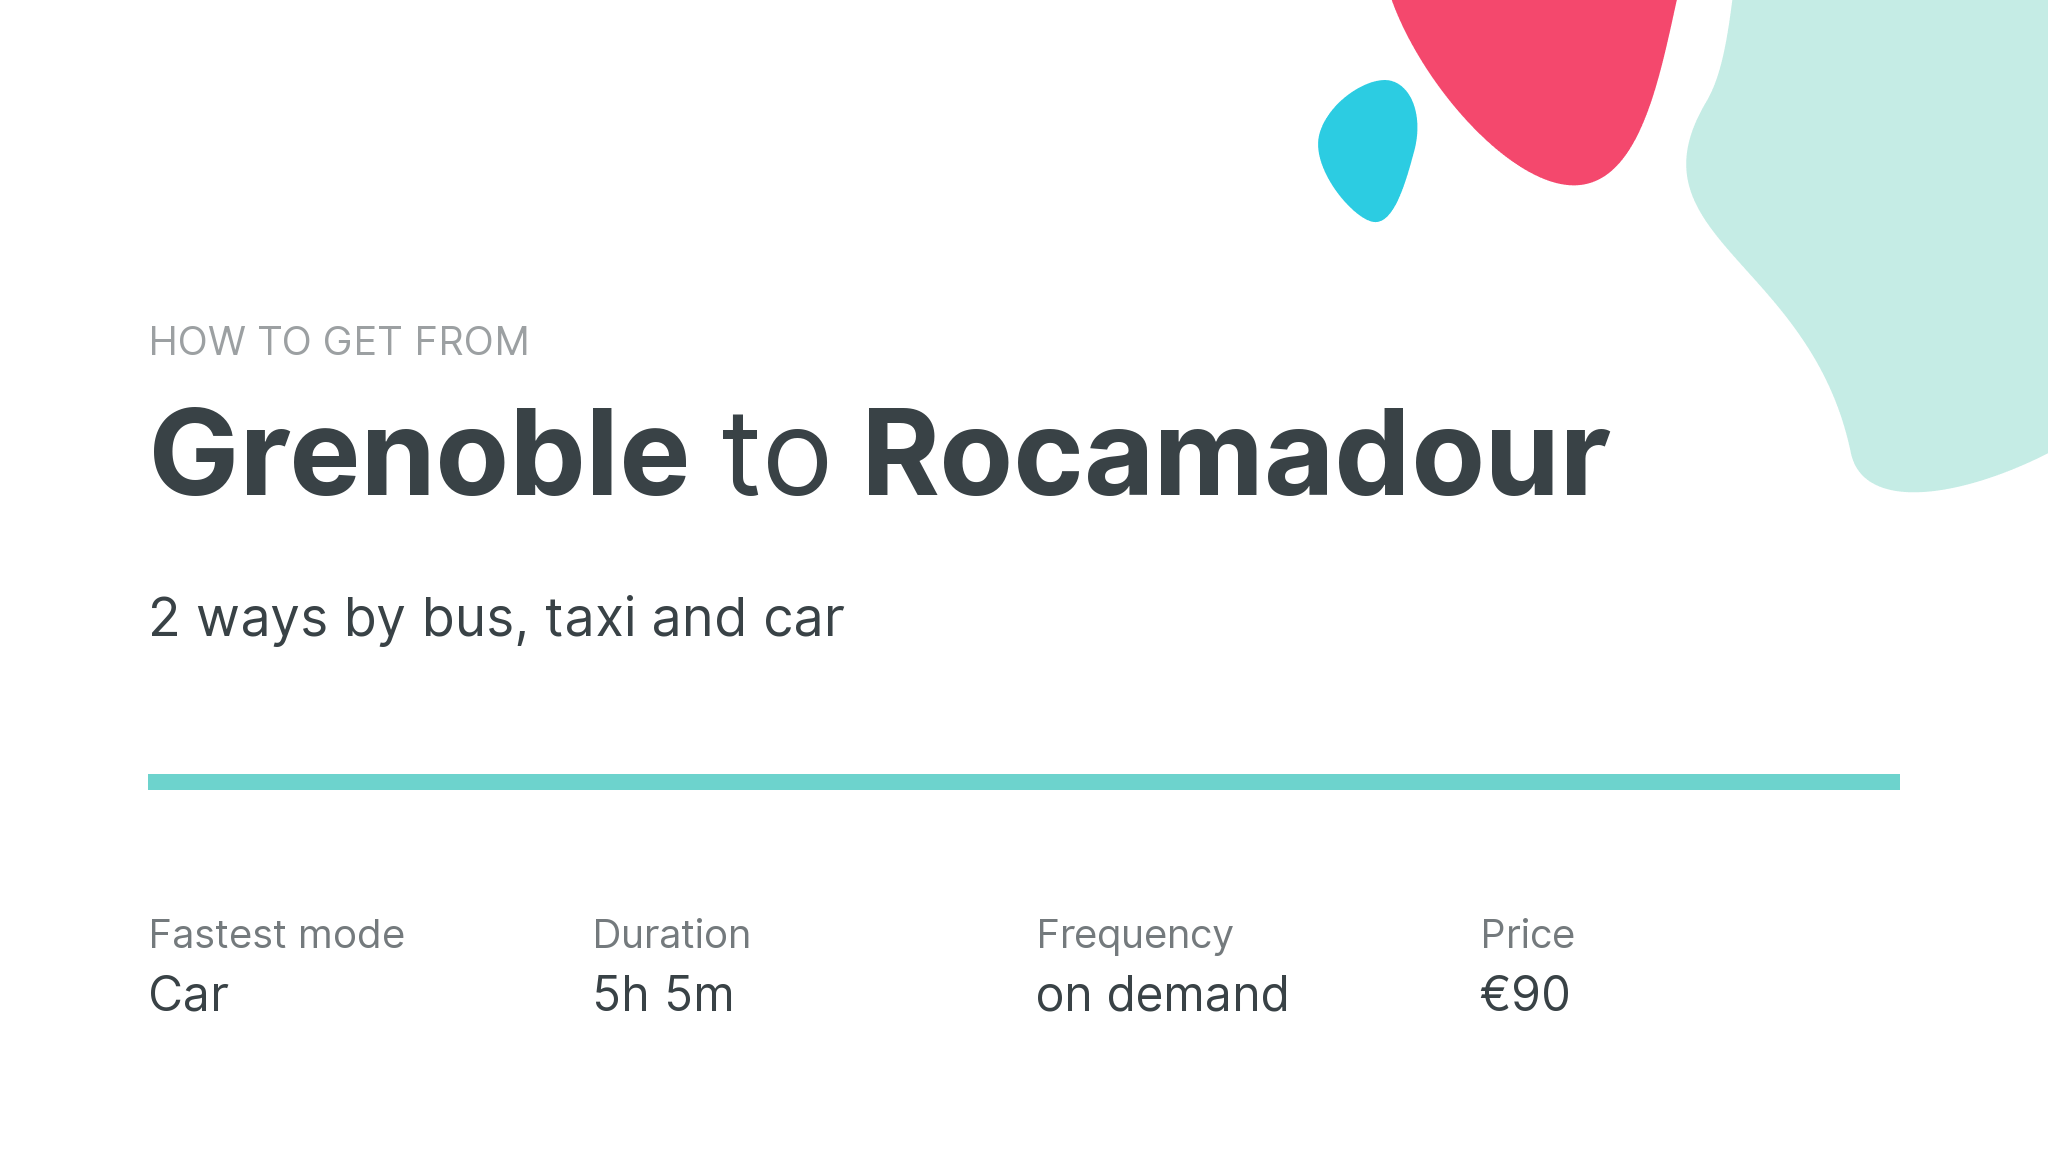 How do I get from Grenoble to Rocamadour